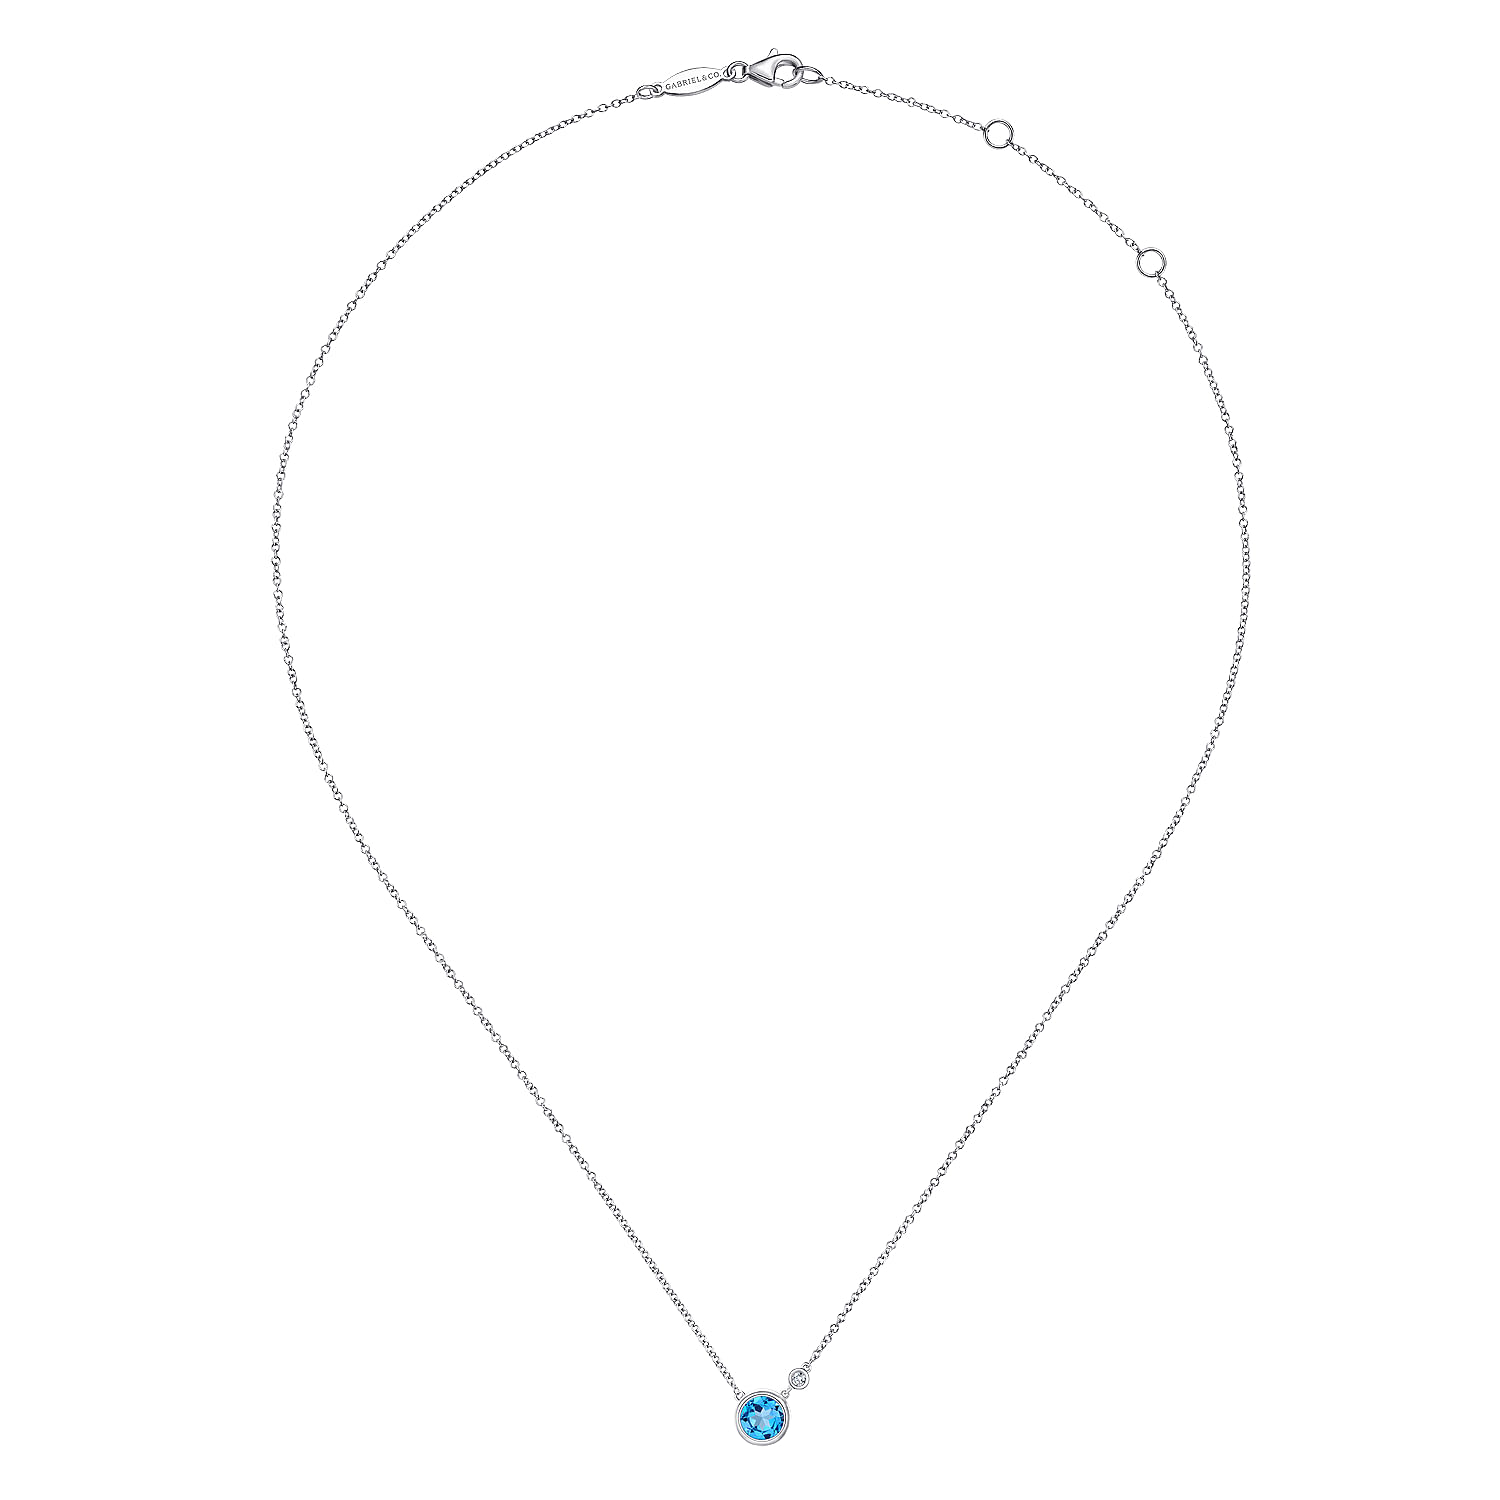 925 Sterling Silver Blue Topaz and Diamond Pendant Necklace